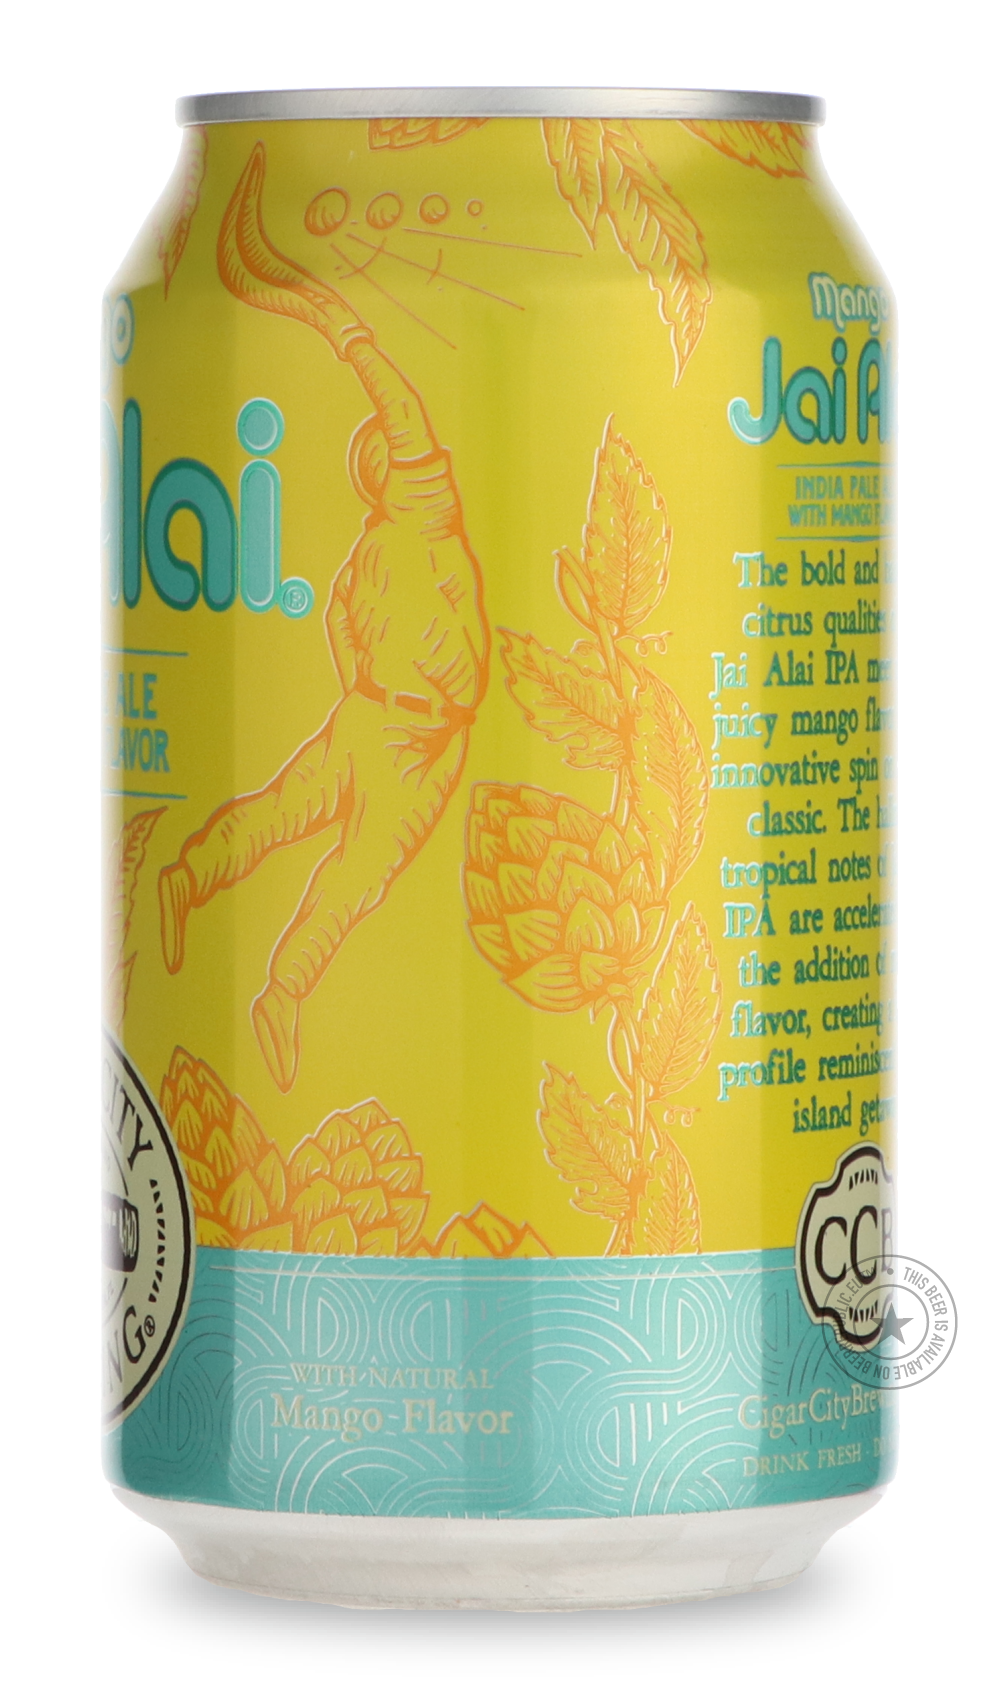 -Cigar City- Mango Jai Alai-IPA- Only @ Beer Republic - The best online beer store for American & Canadian craft beer - Buy beer online from the USA and Canada - Bier online kopen - Amerikaans bier kopen - Craft beer store - Craft beer kopen - Amerikanisch bier kaufen - Bier online kaufen - Acheter biere online - IPA - Stout - Porter - New England IPA - Hazy IPA - Imperial Stout - Barrel Aged - Barrel Aged Imperial Stout - Brown - Dark beer - Blond - Blonde - Pilsner - Lager - Wheat - Weizen - Amber - Barle